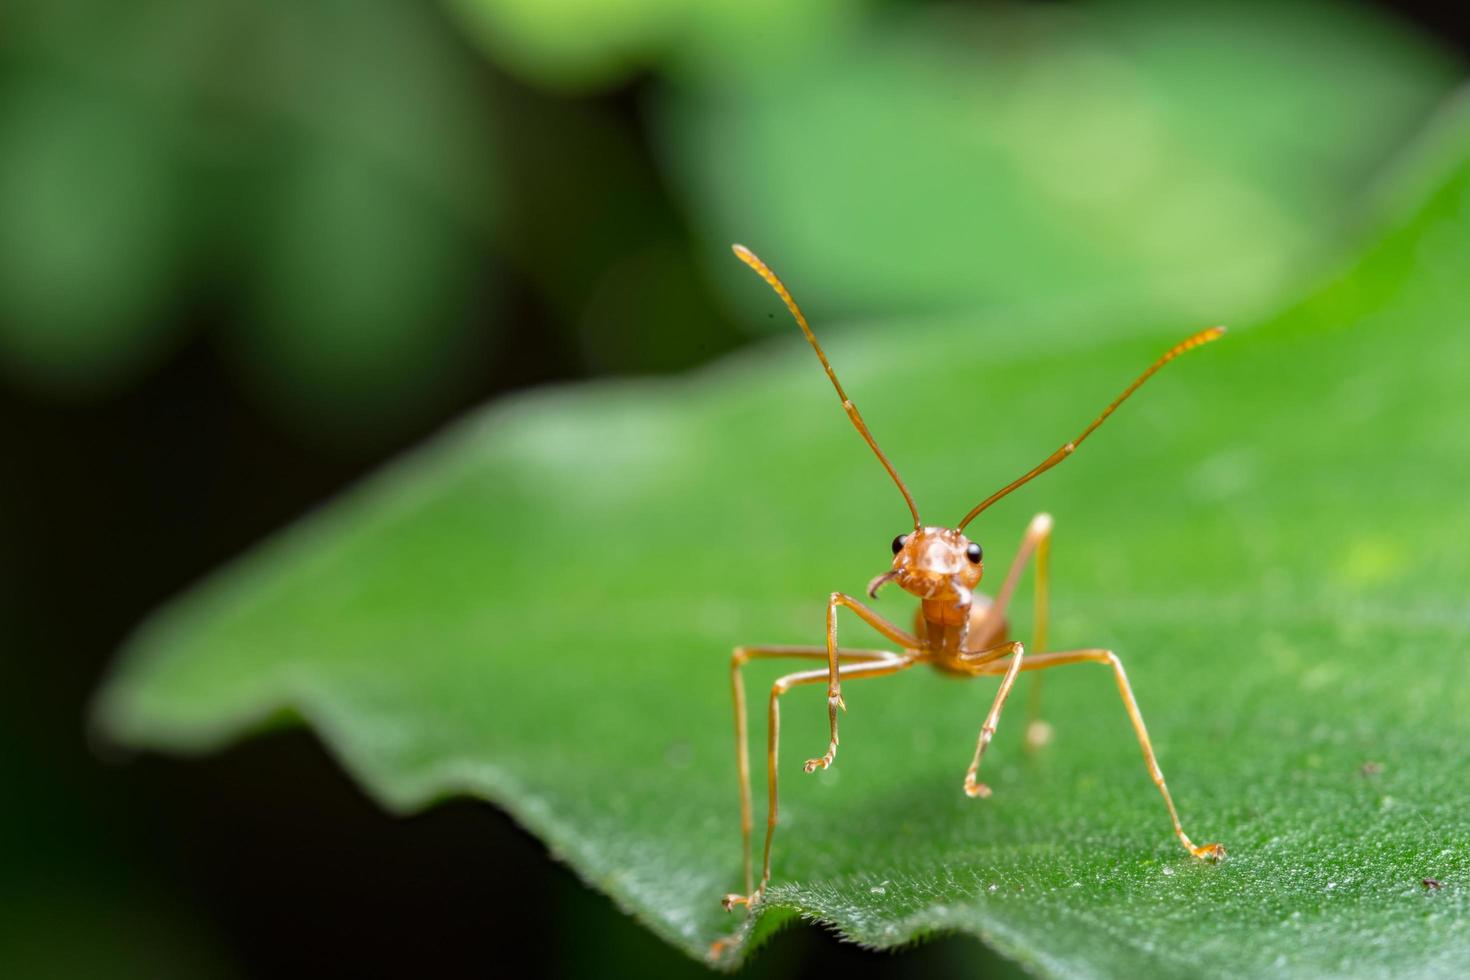 A close look at a red ant photo